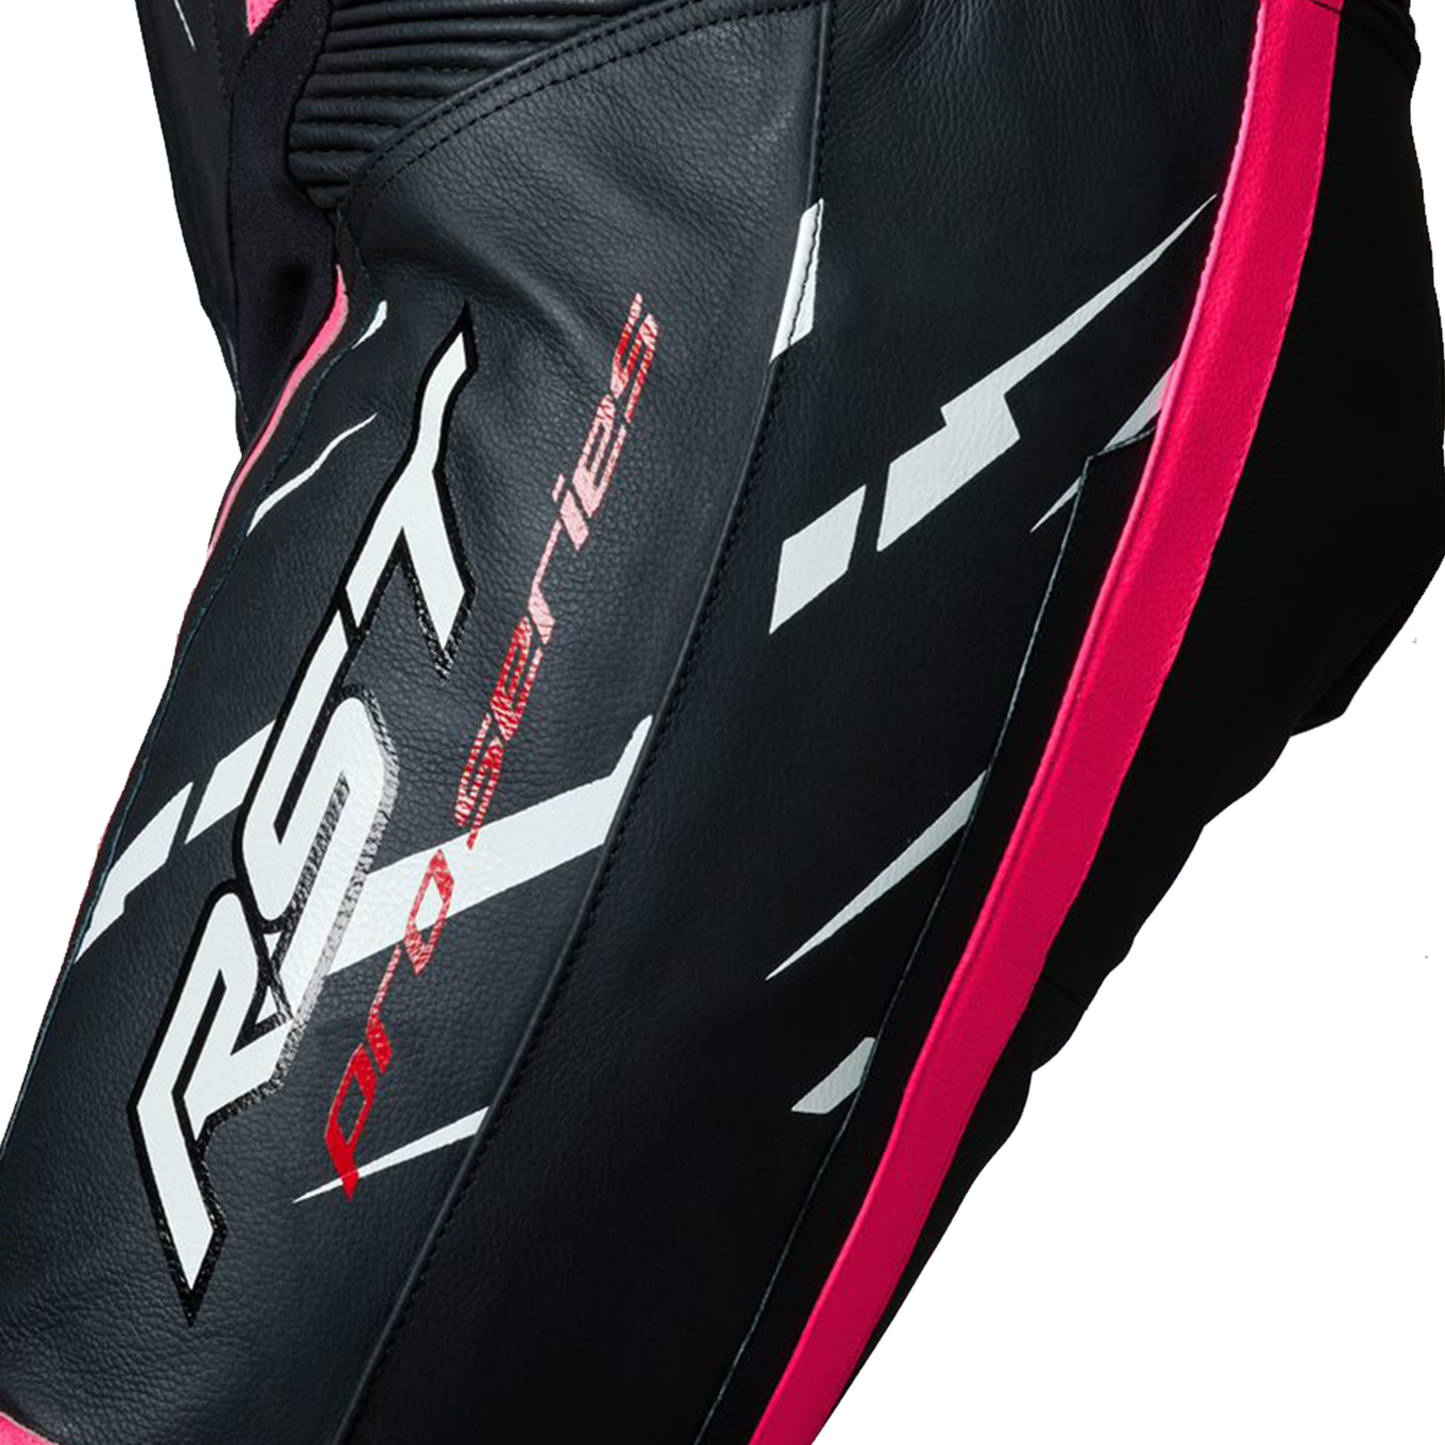 RST Pro Series Evo Airbag Men's Leather Suit - Neon Pink/White Lightning